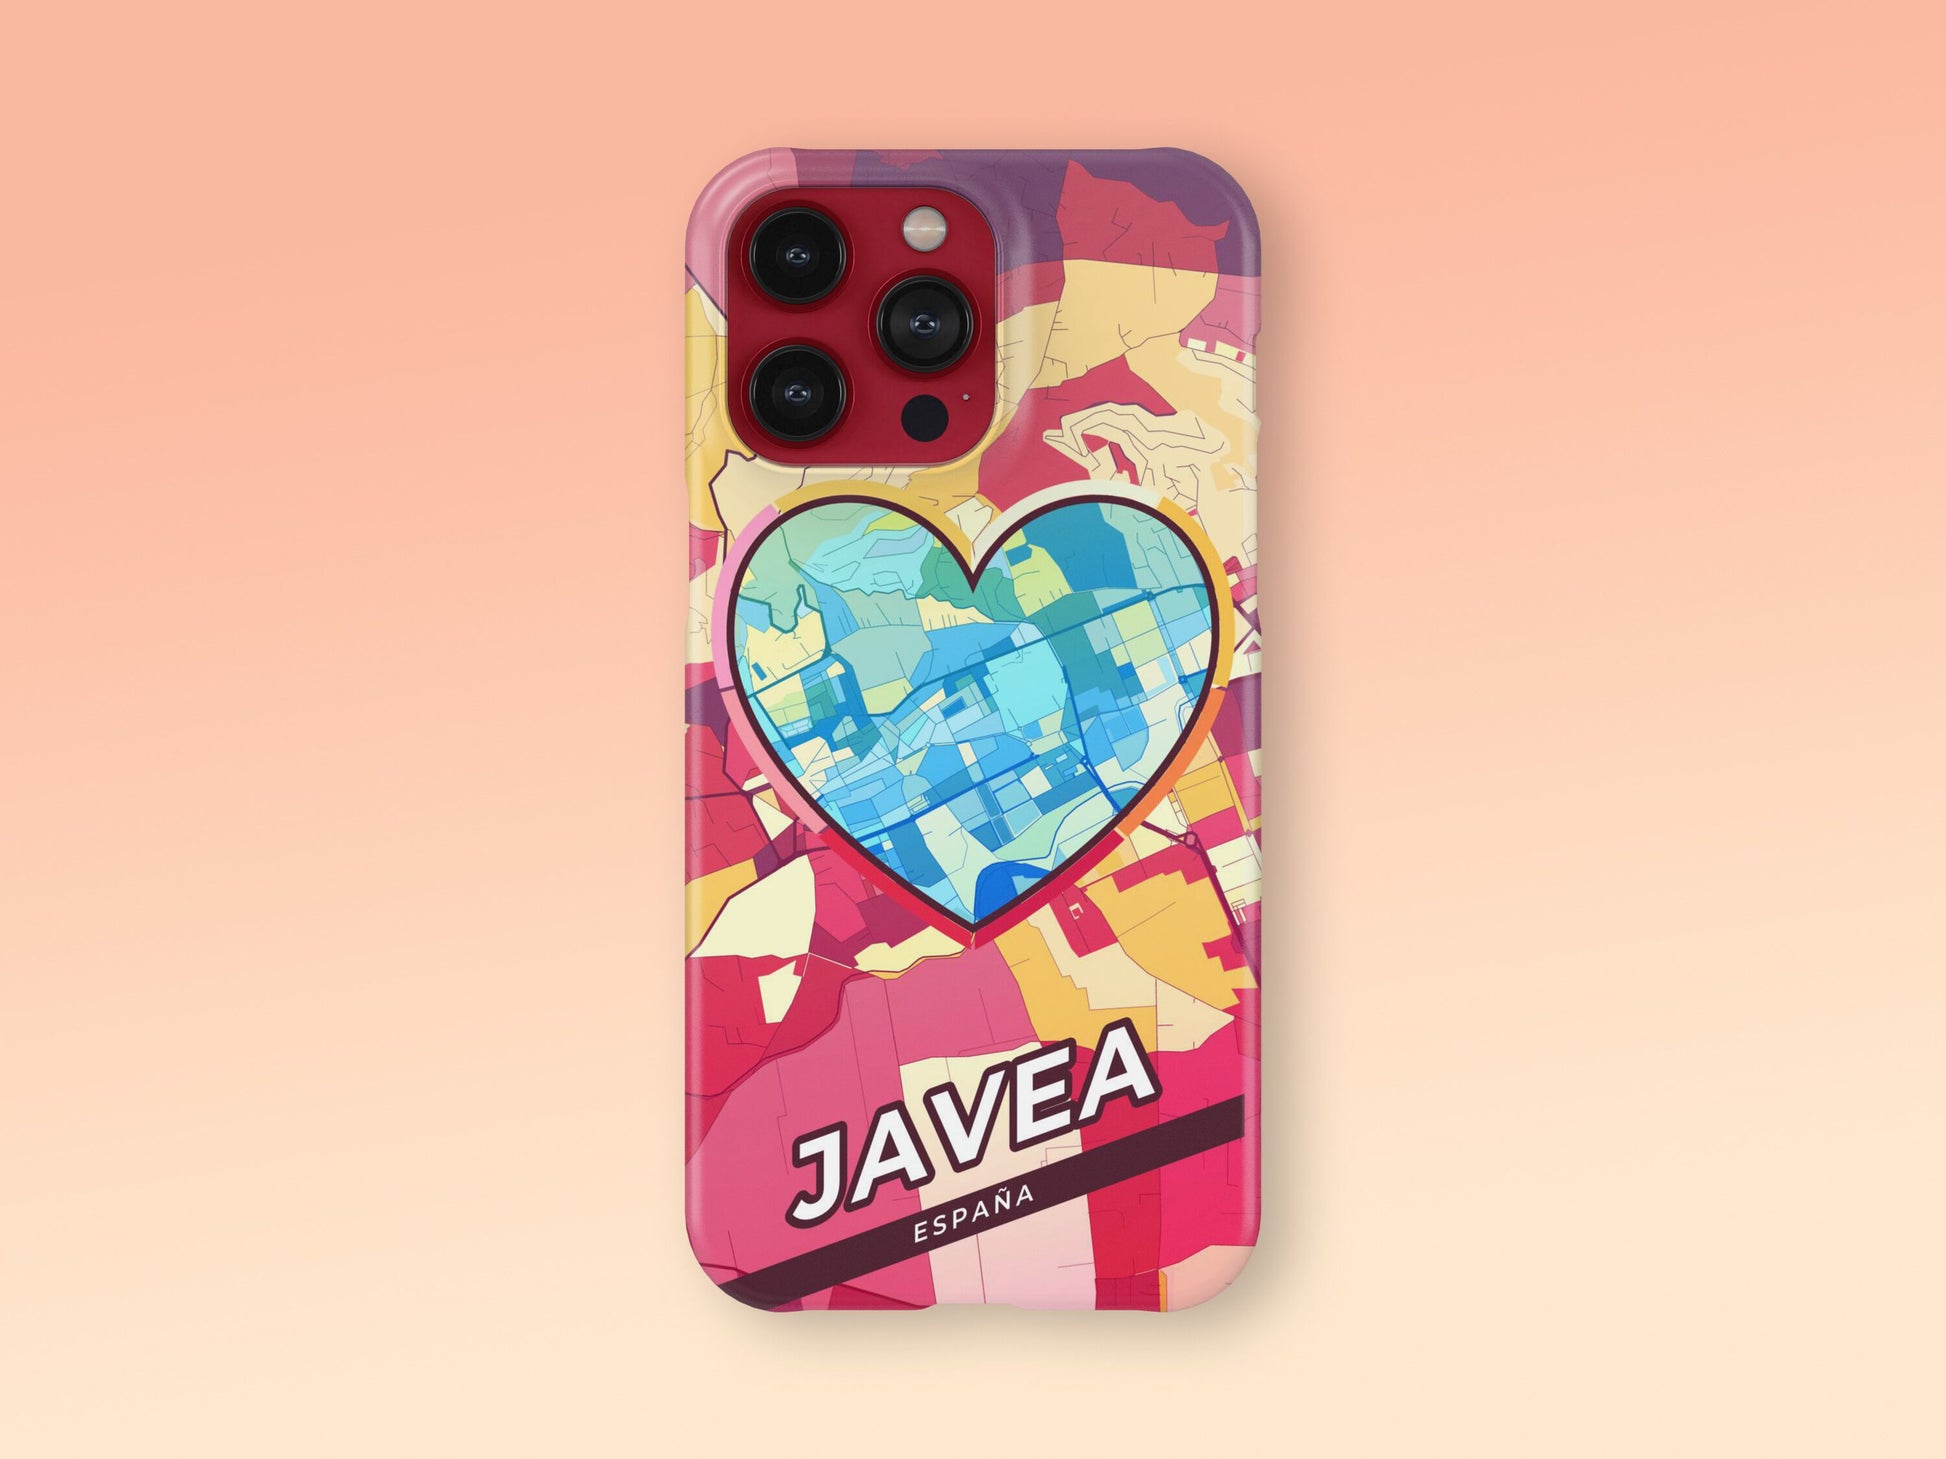 Javea Spain slim phone case with colorful icon. Birthday, wedding or housewarming gift. Couple match cases. 2